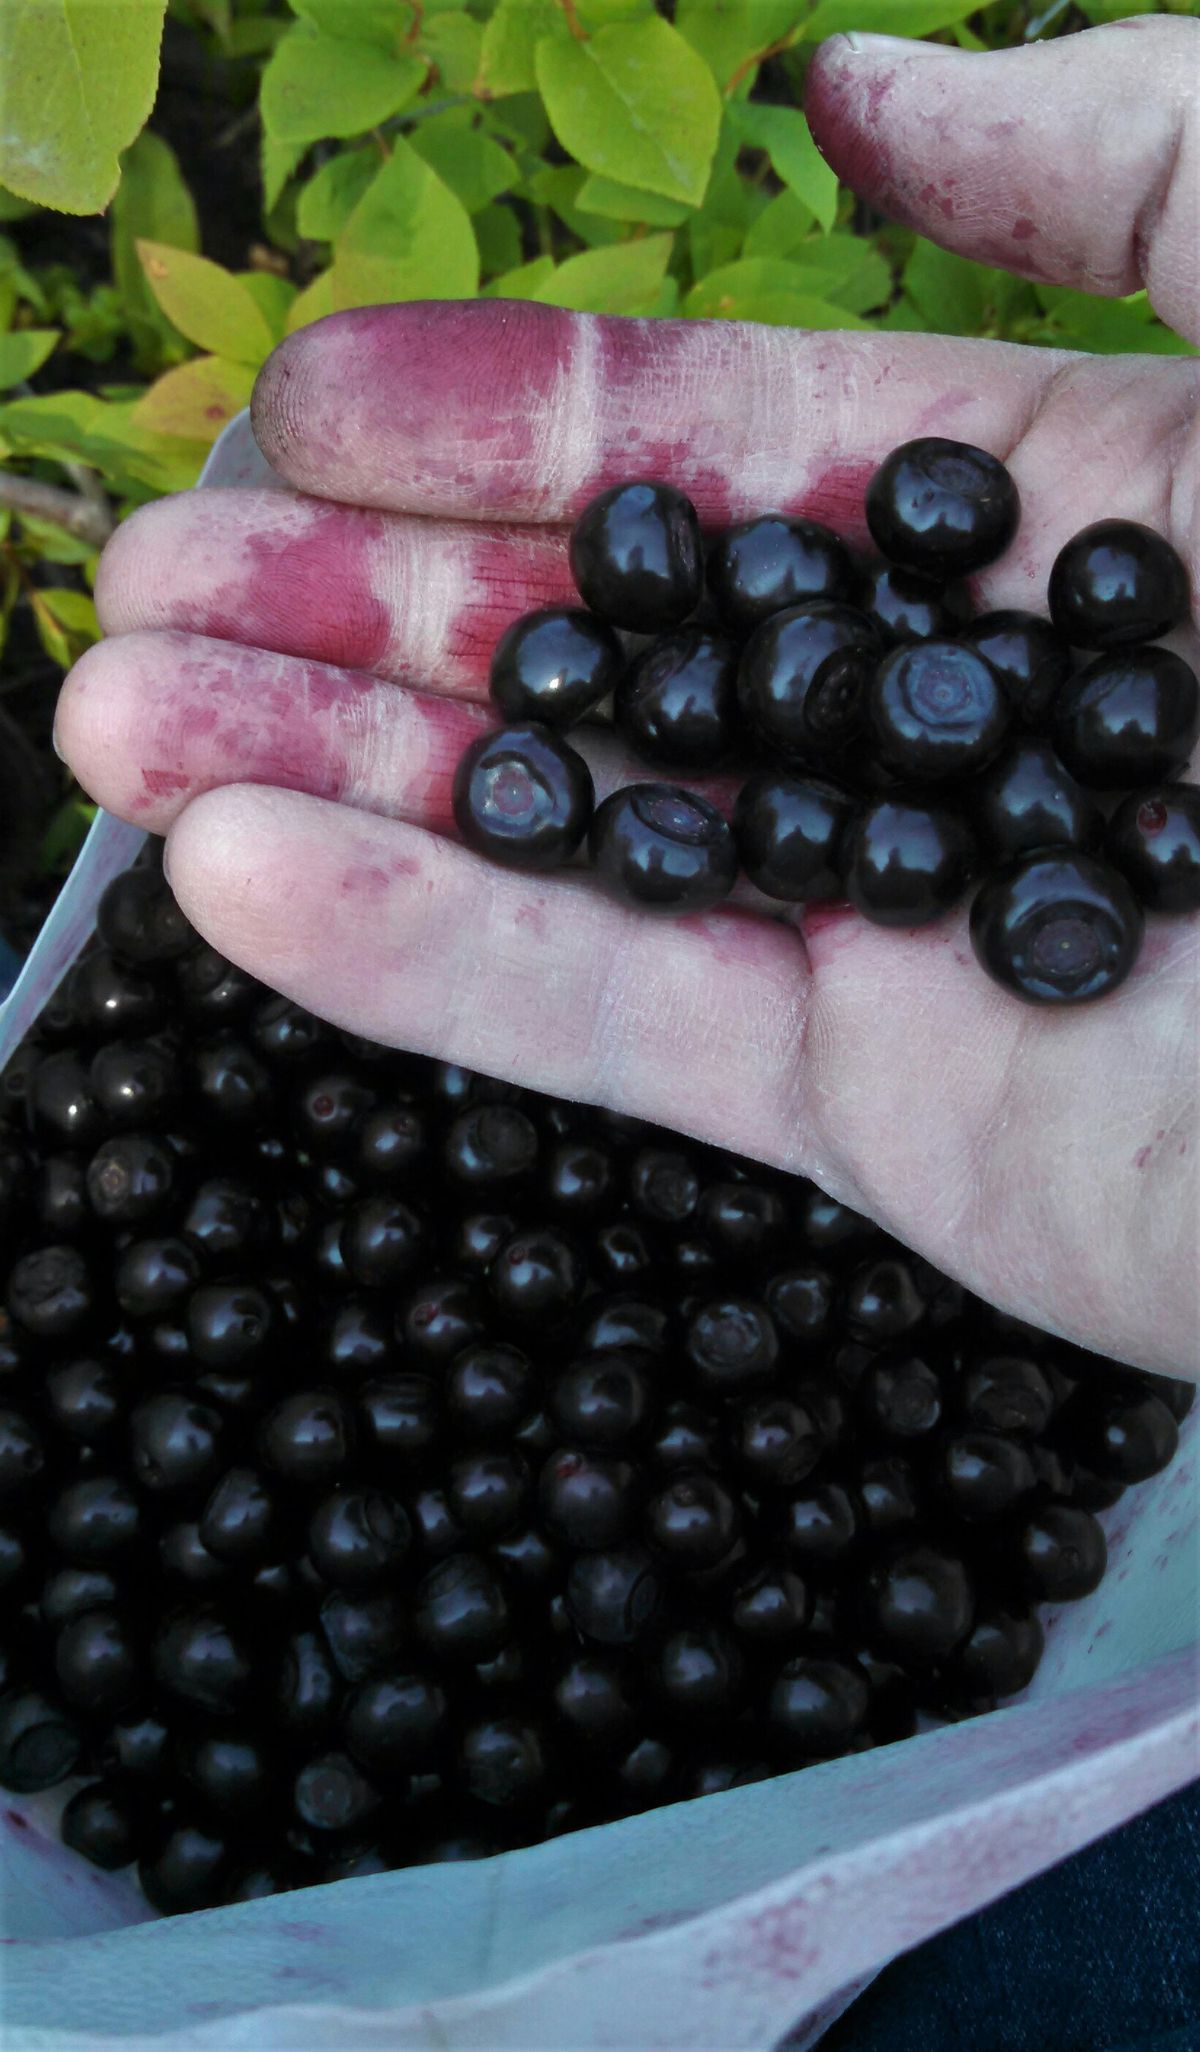 Huge, plump, ripe huckleberries capture the attention of a serious berry picker. (Ed Cairns)